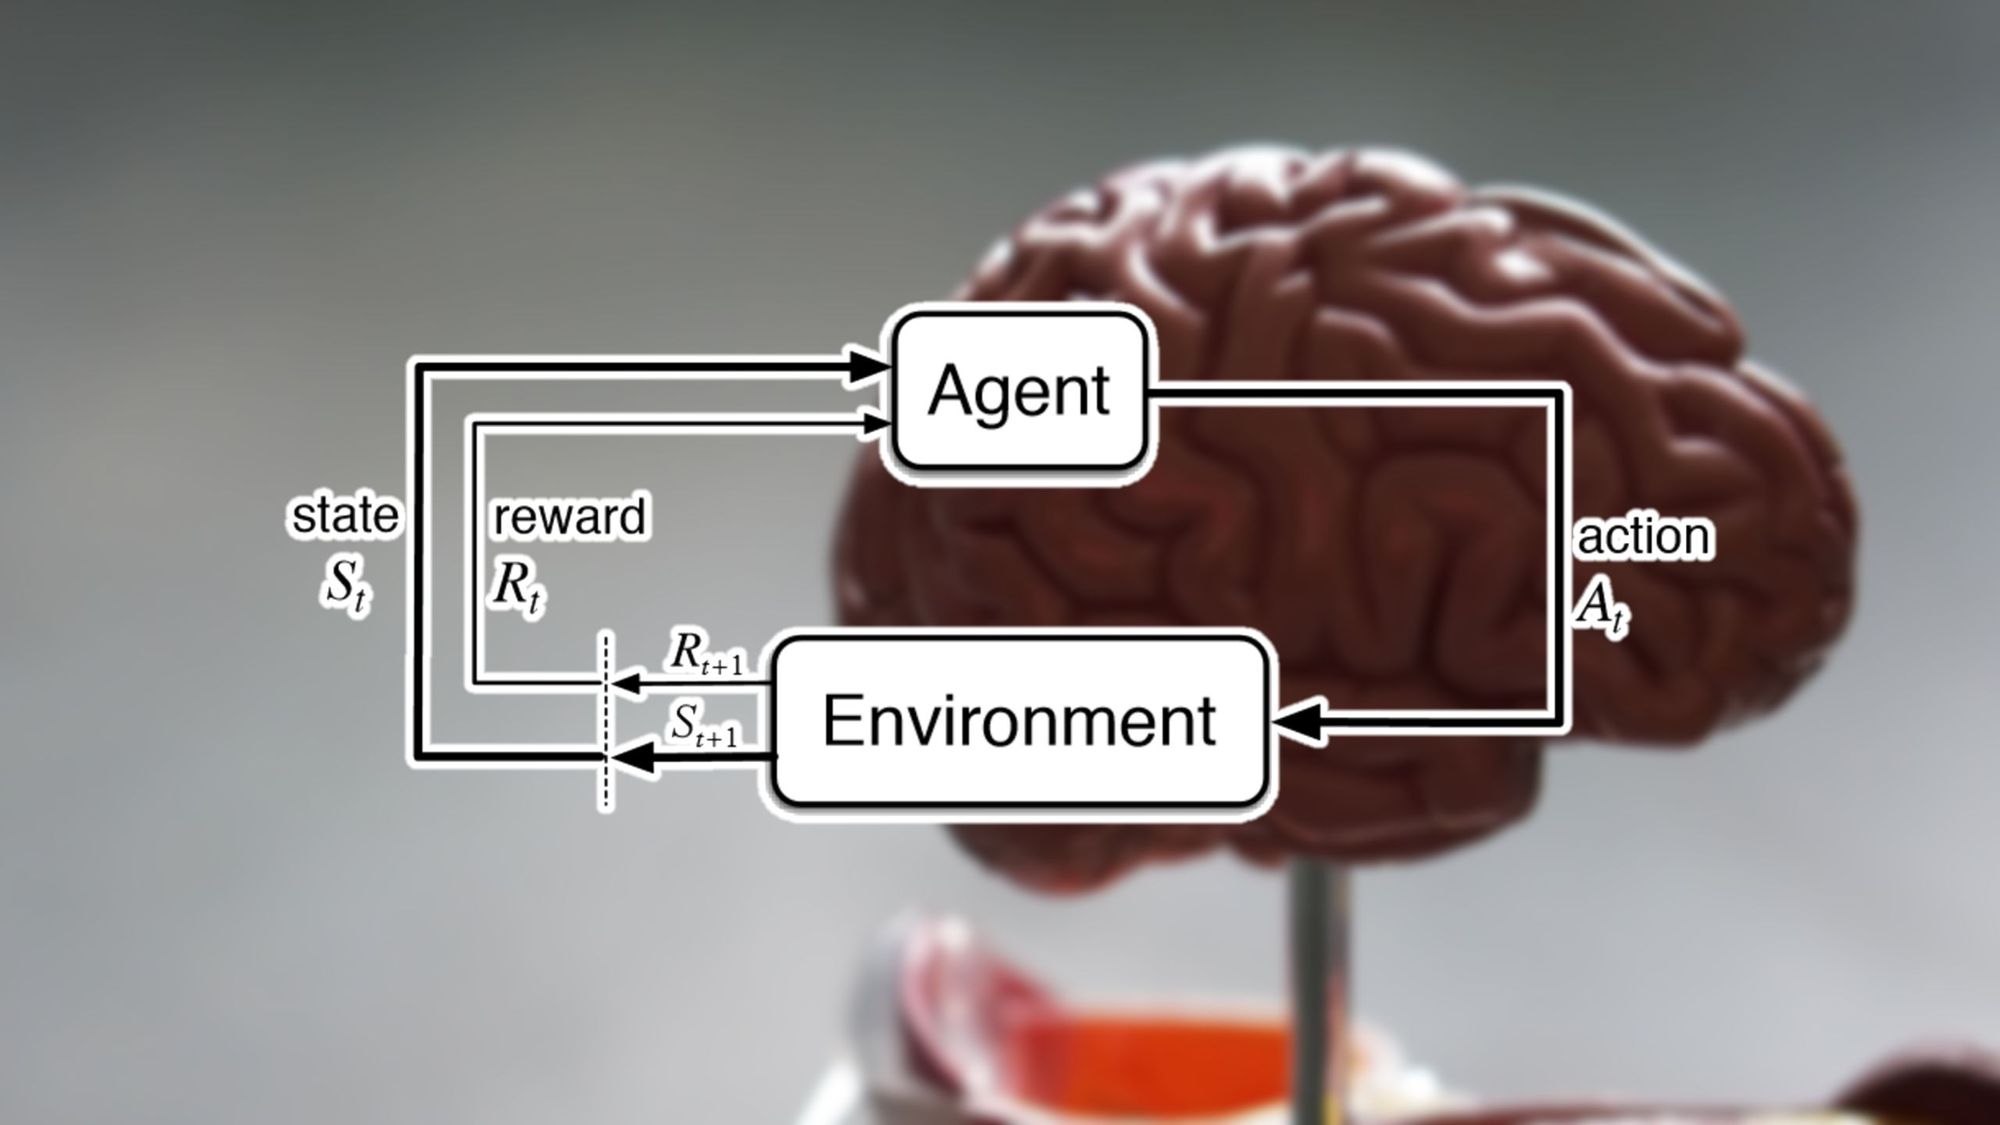 DeepMind scientists: Reinforcement learning is enough for general AI